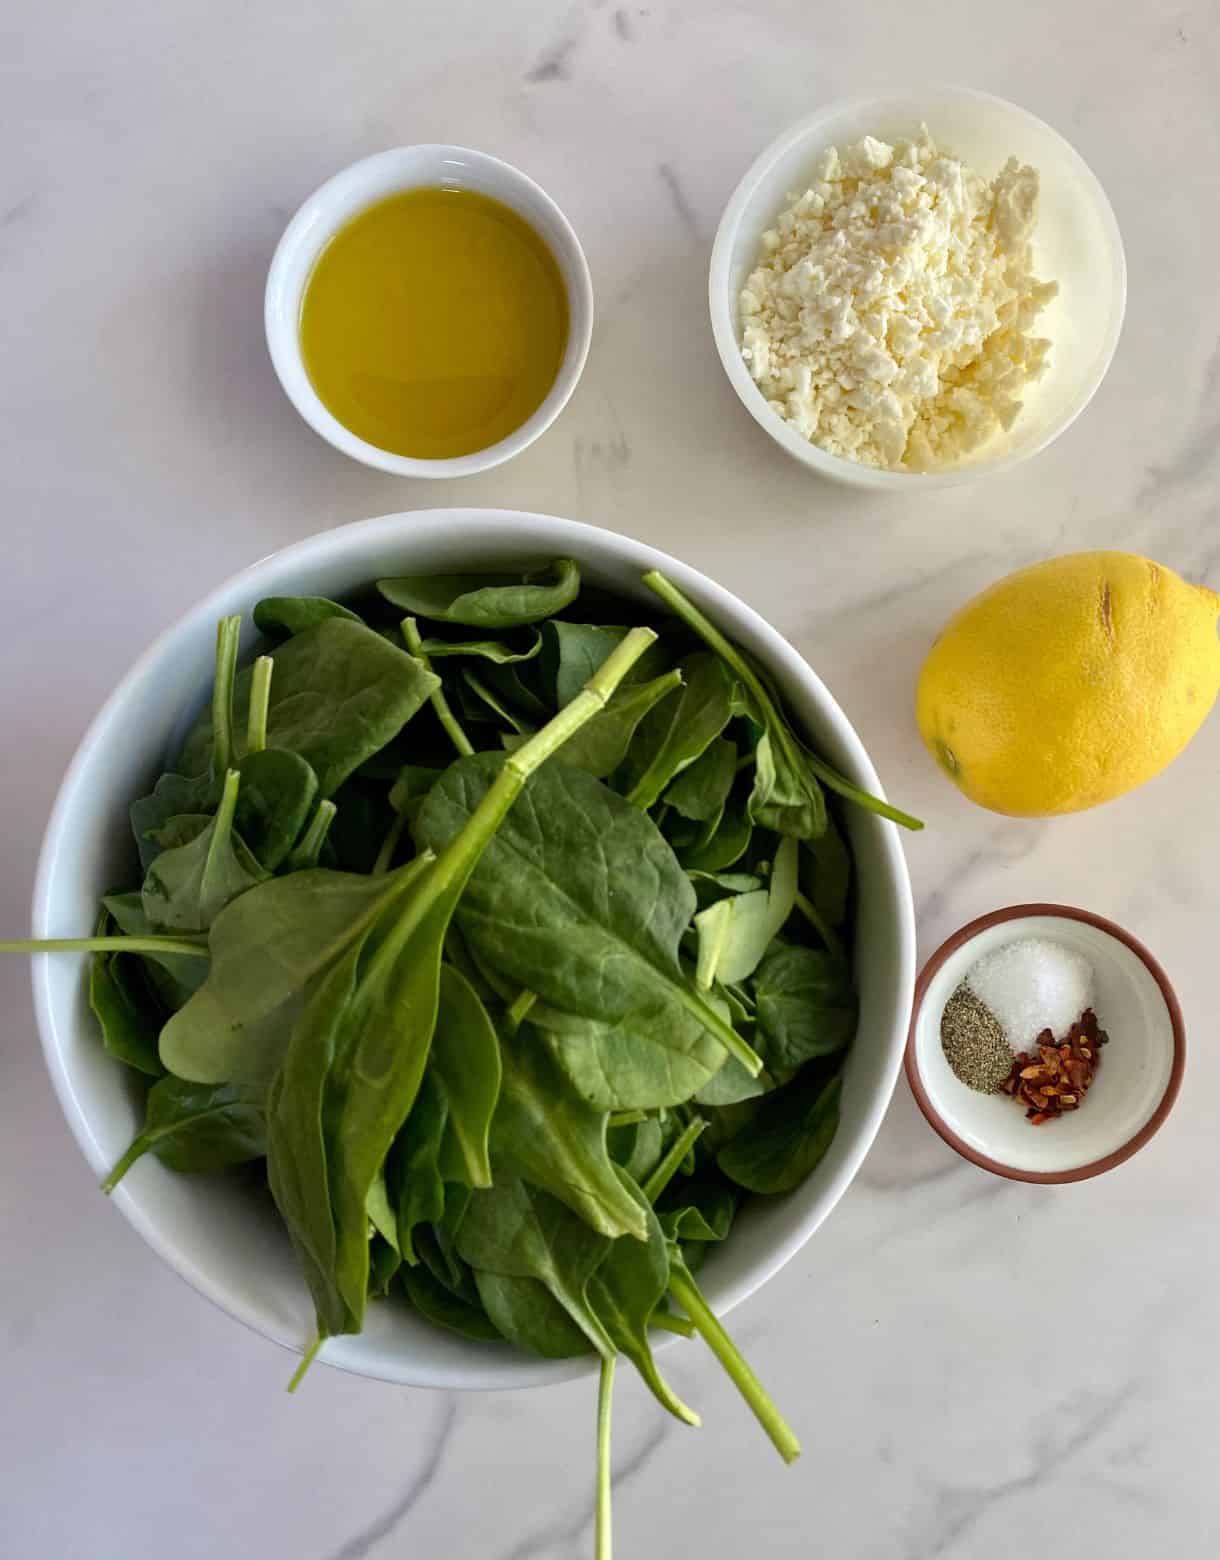 Raw spinach, crumbled feta cheese, olive oil, a lemon, salt, pepper and red pepper flakes.